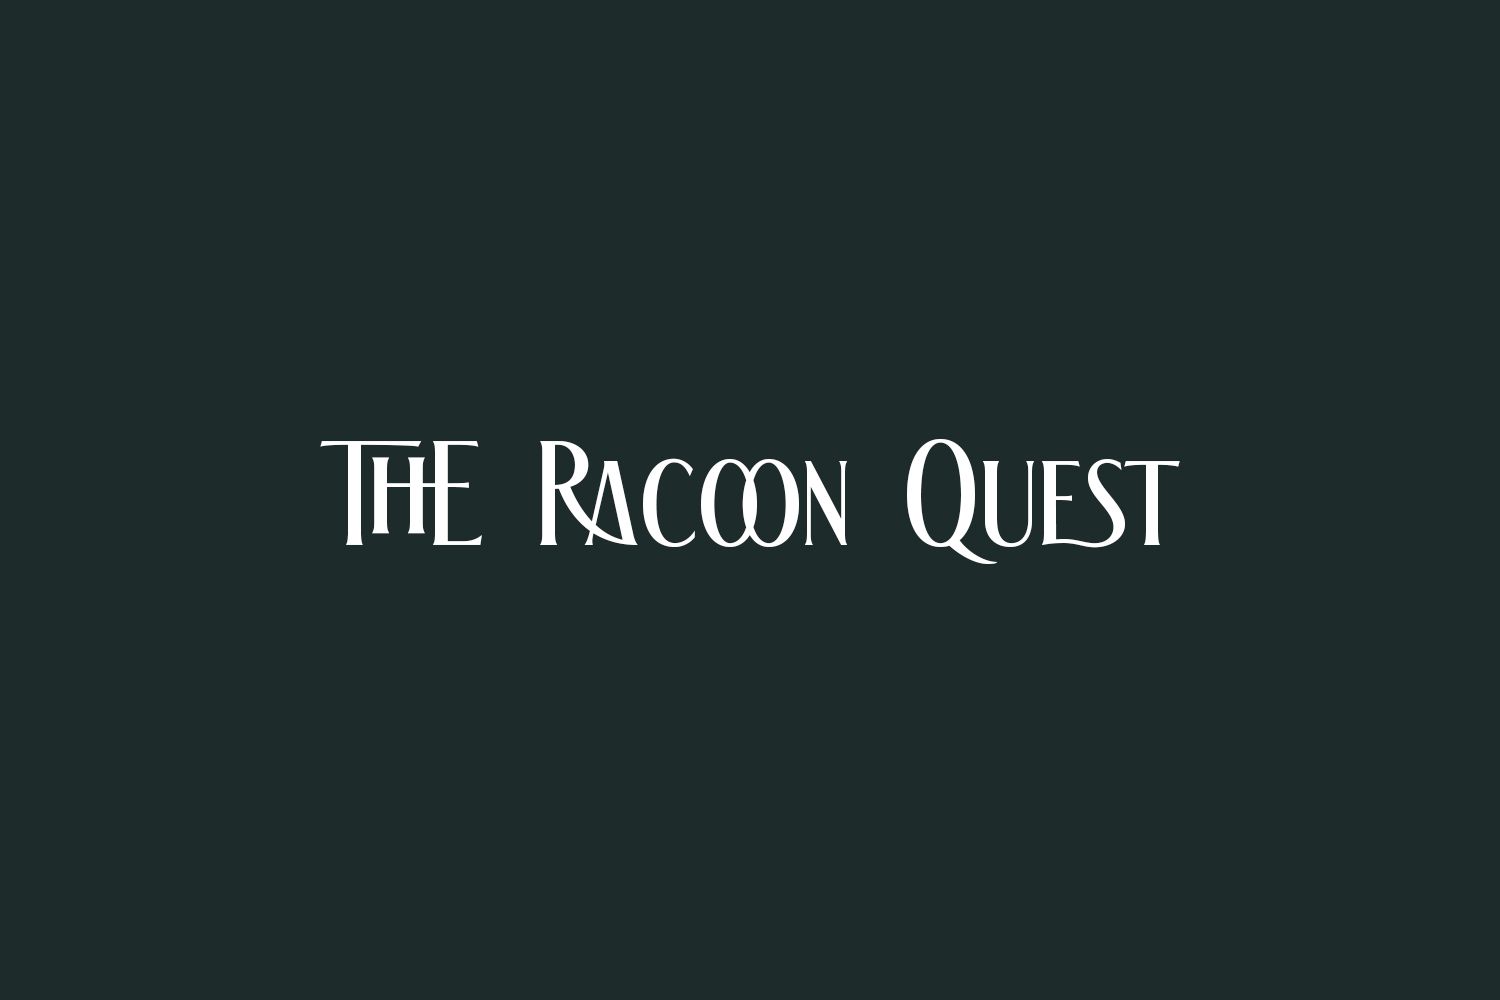 The Racoon Quest Free Font